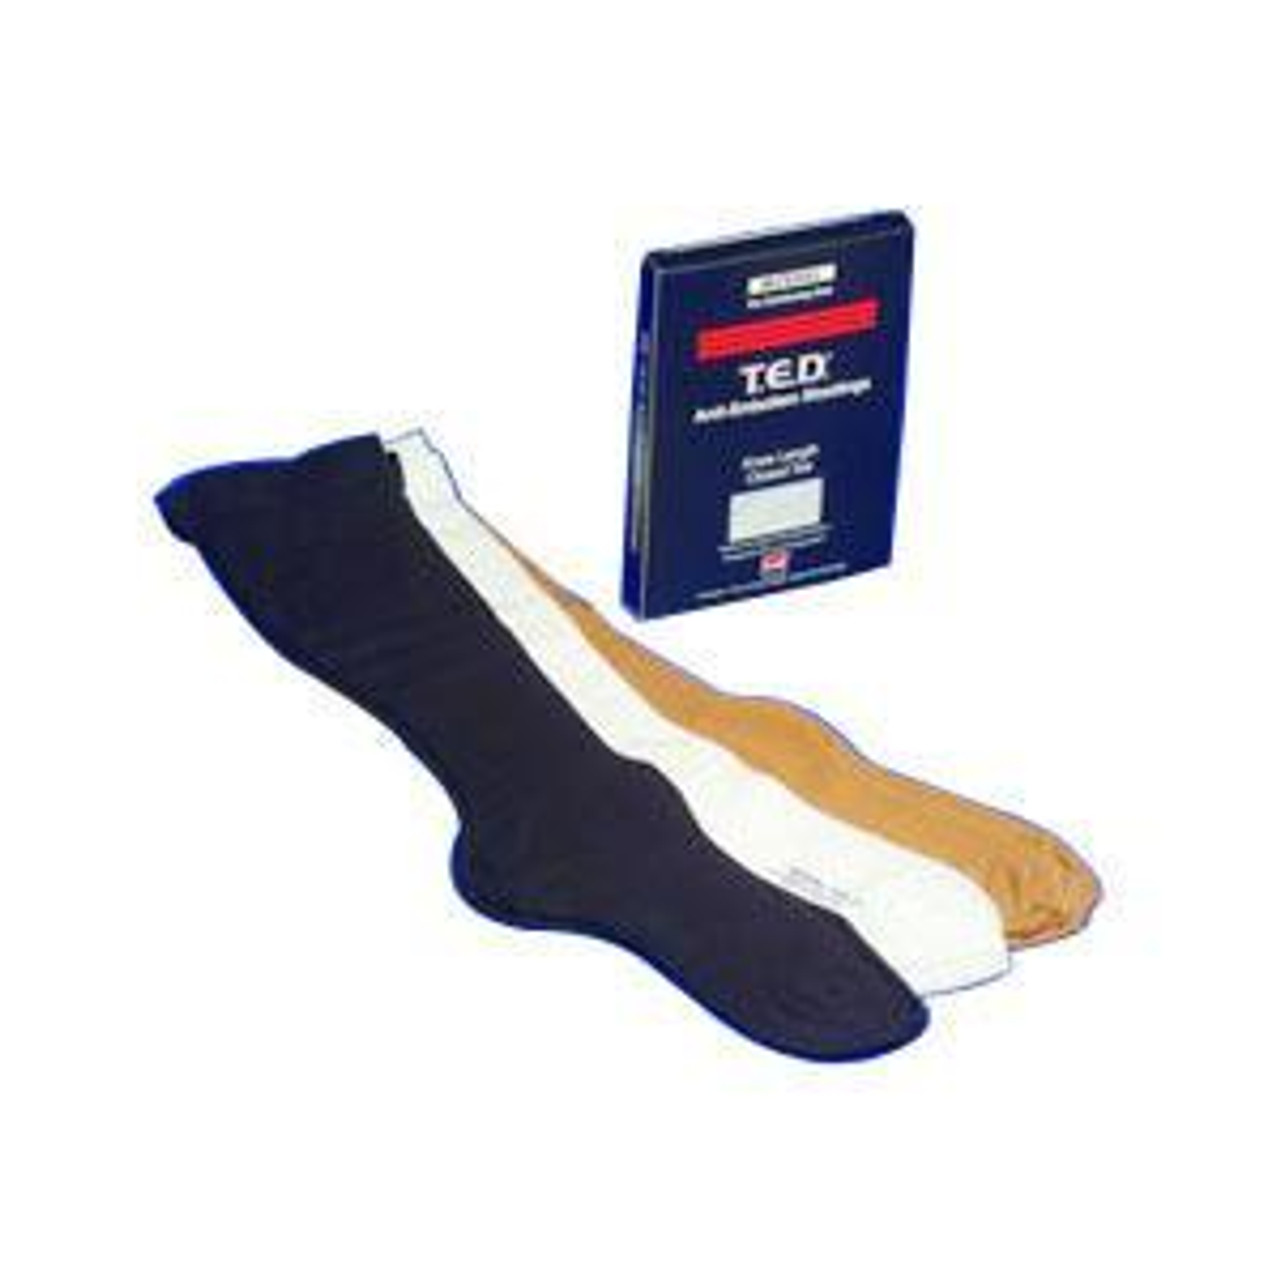 Kendall 4335 (CS12) TED KNEE LGTH CONT CARE ANTI-EMBOLISM STOCKING, Large (NON-RETURNABLE) (Kendall 4335)